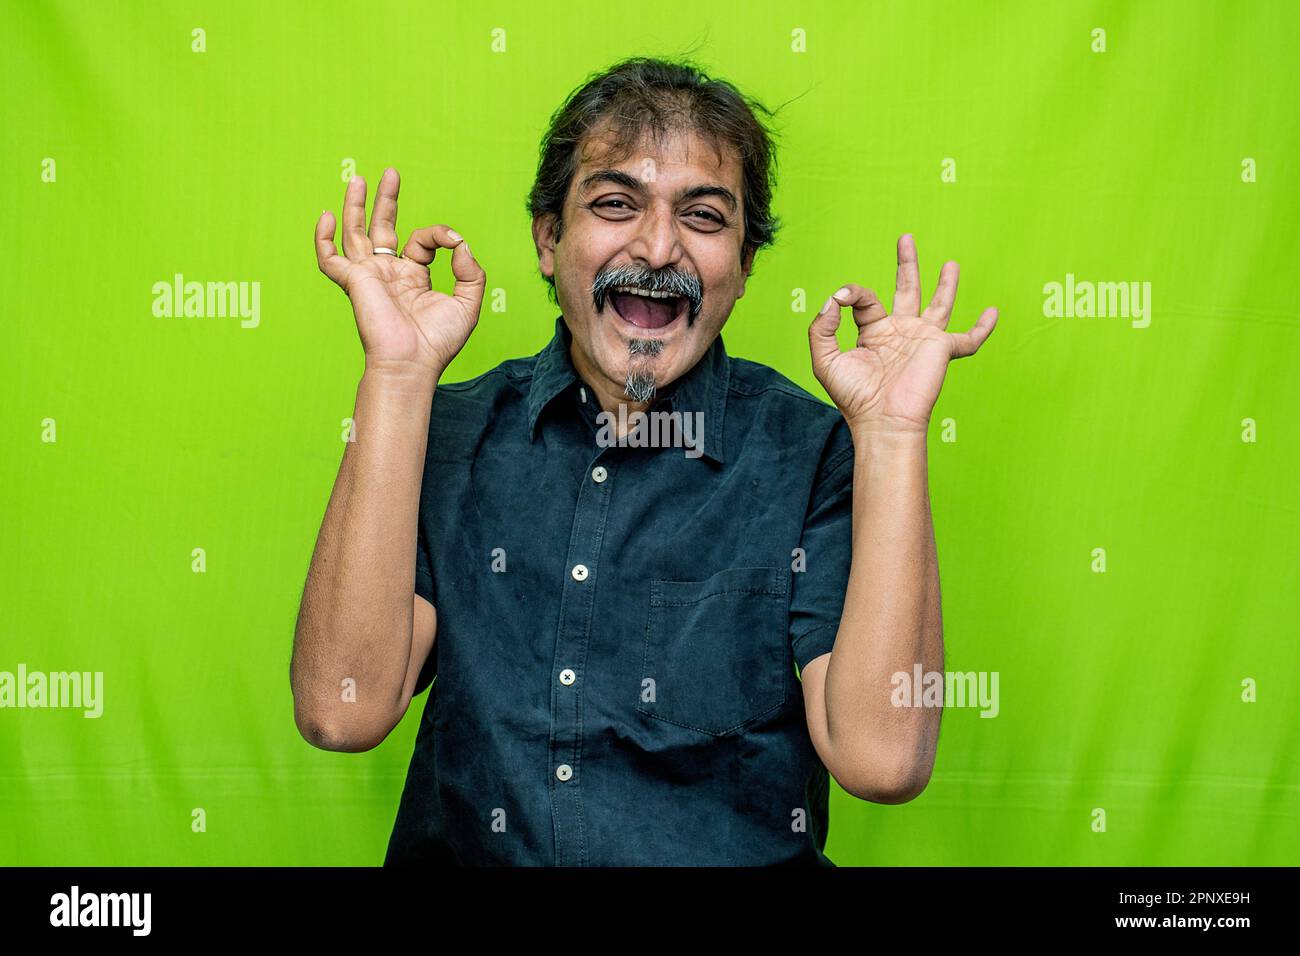 The corporate man in black shirt looks joyful and charming, laughing and gesturing with hands against a green screen background Stock Photo